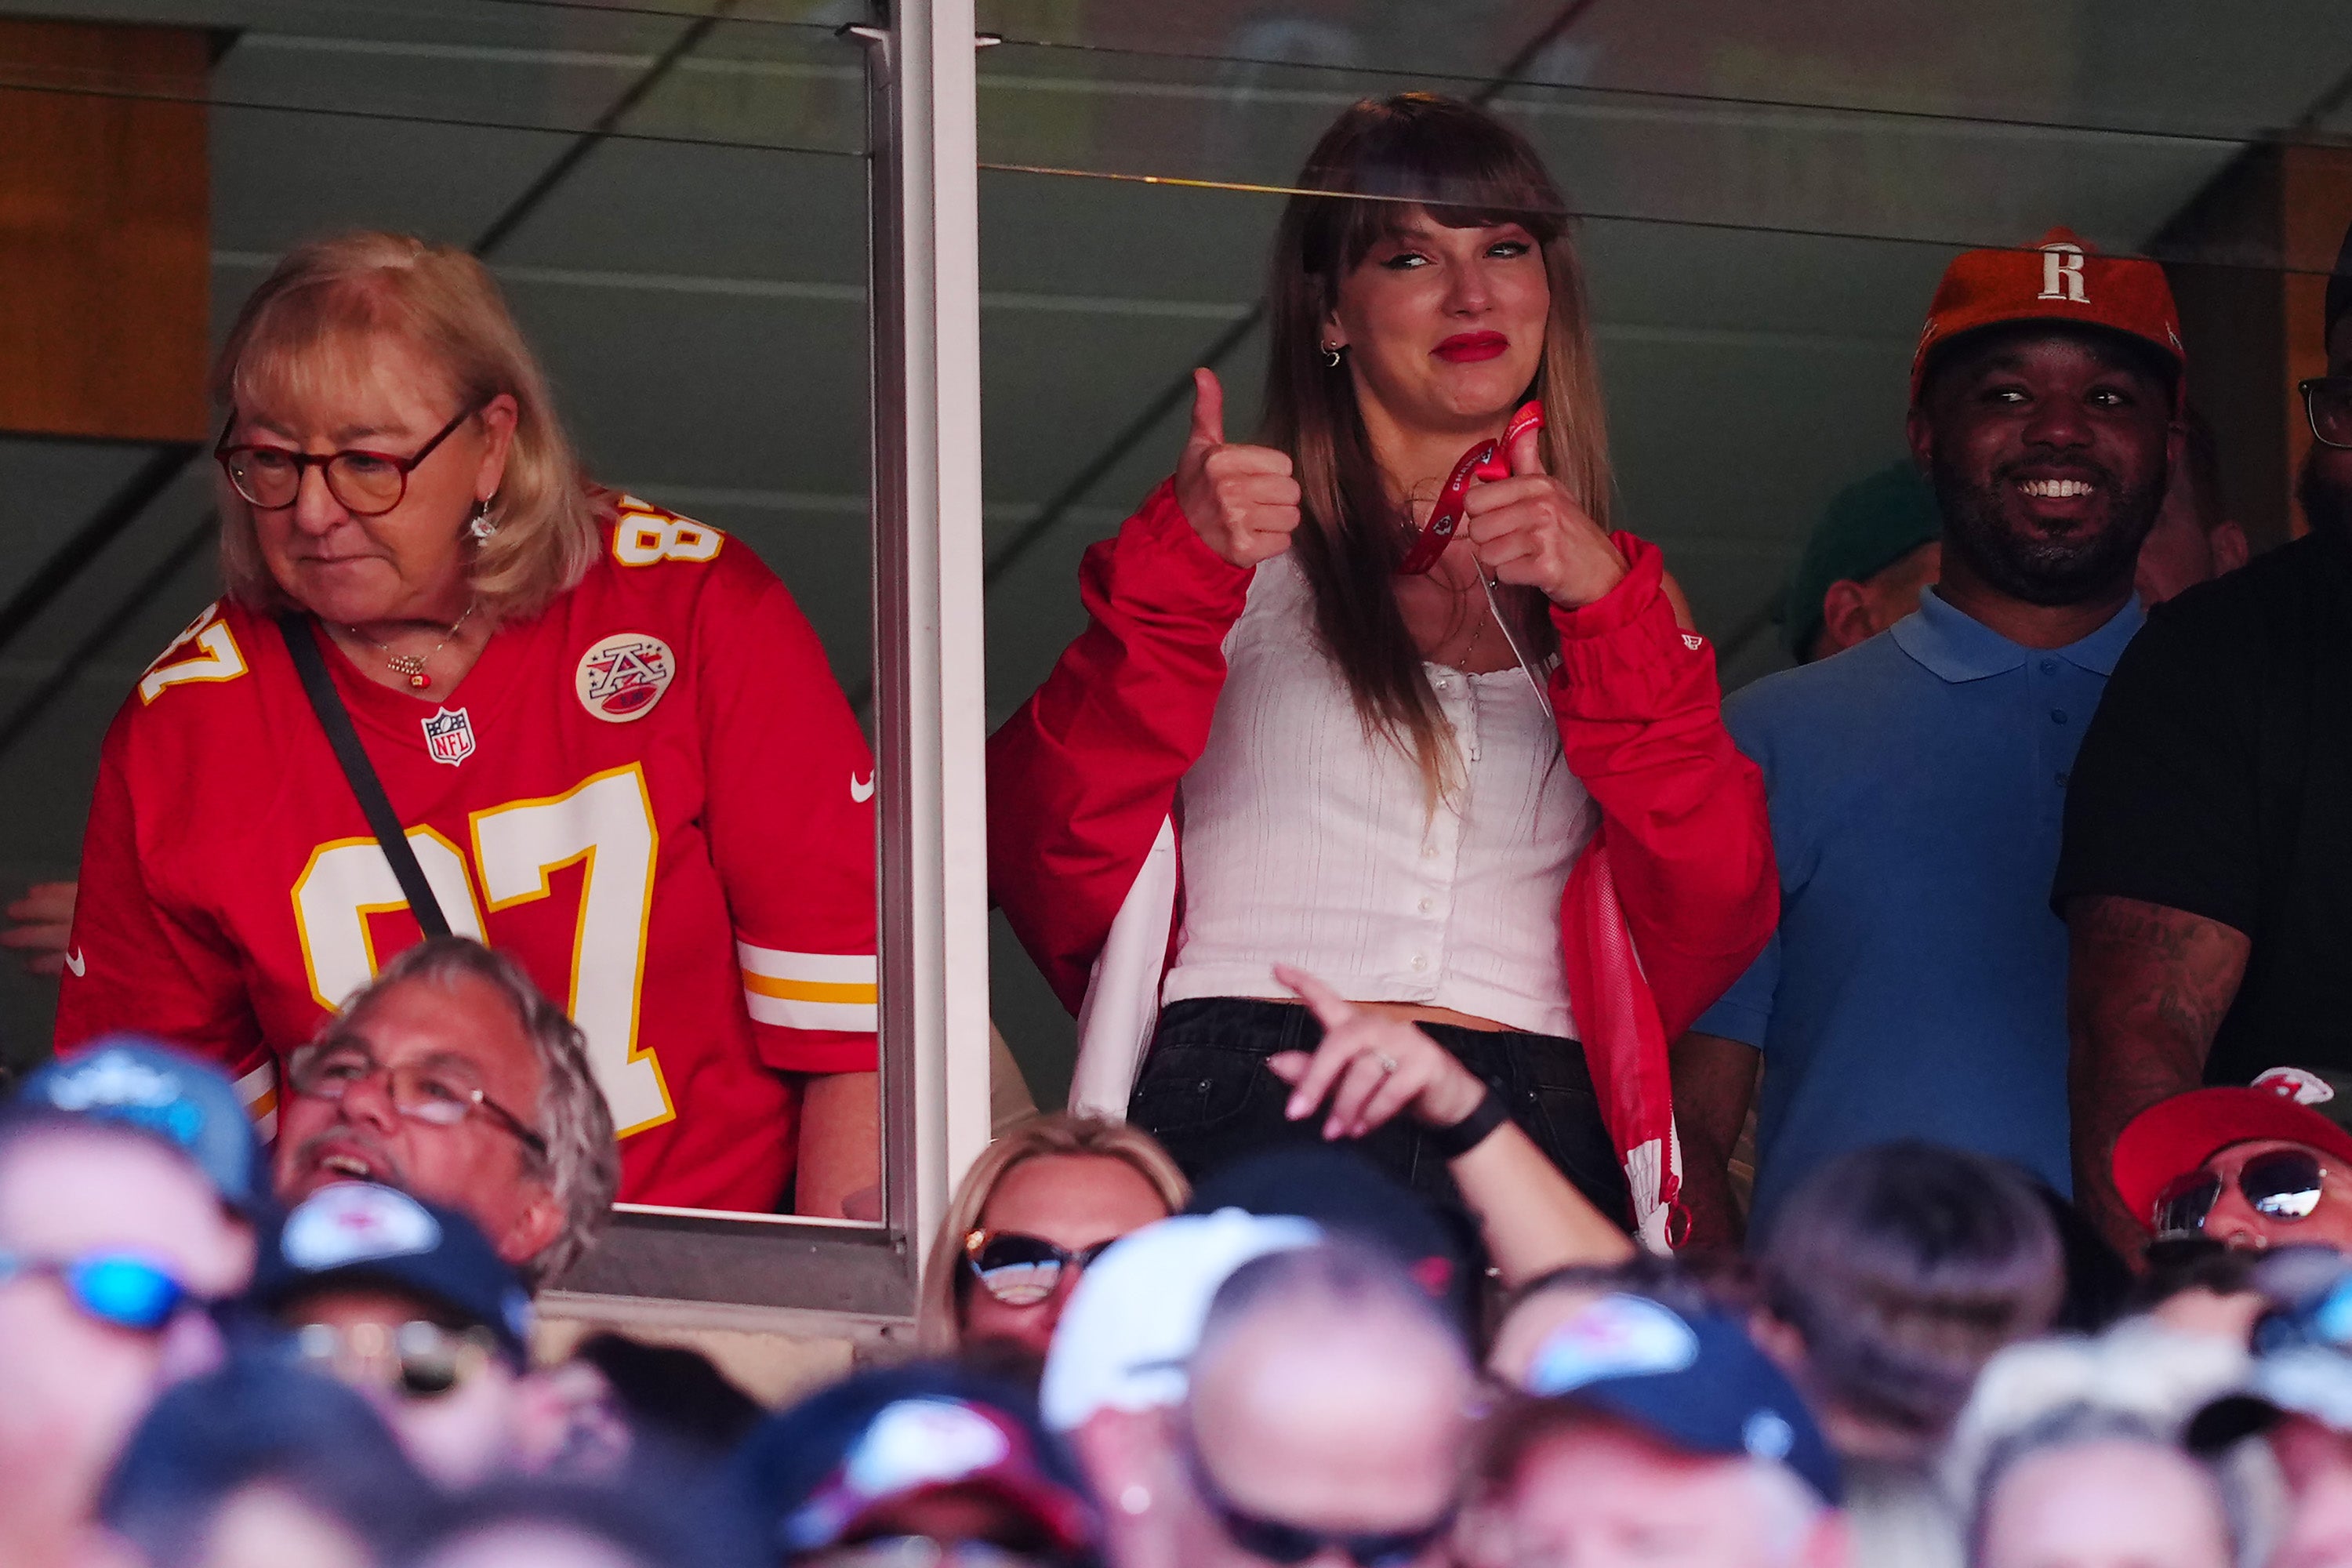 Taylor Swift gives the thumbs up during the first half the Kansas City Chiefs game with rumours she is in relationship with player Travis Kelce